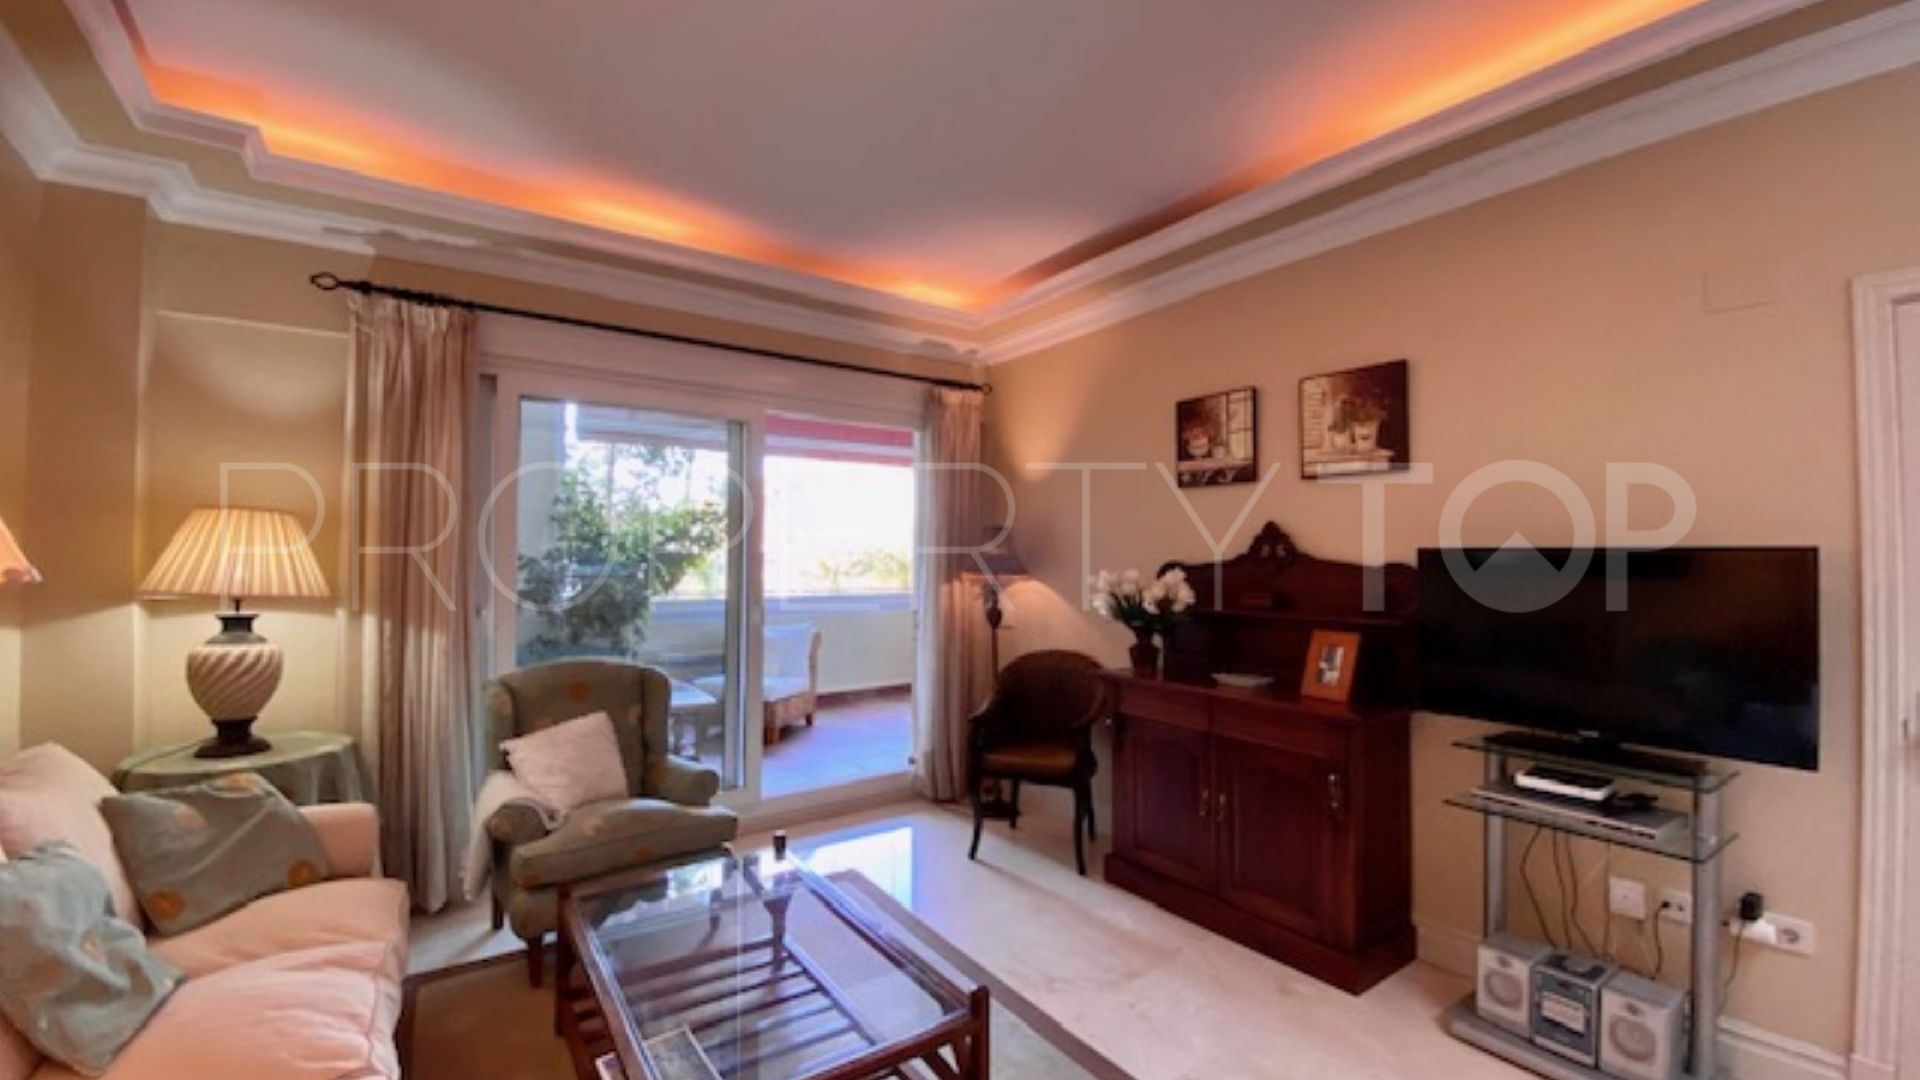 Ground floor apartment with 3 bedrooms for sale in Las Cañas